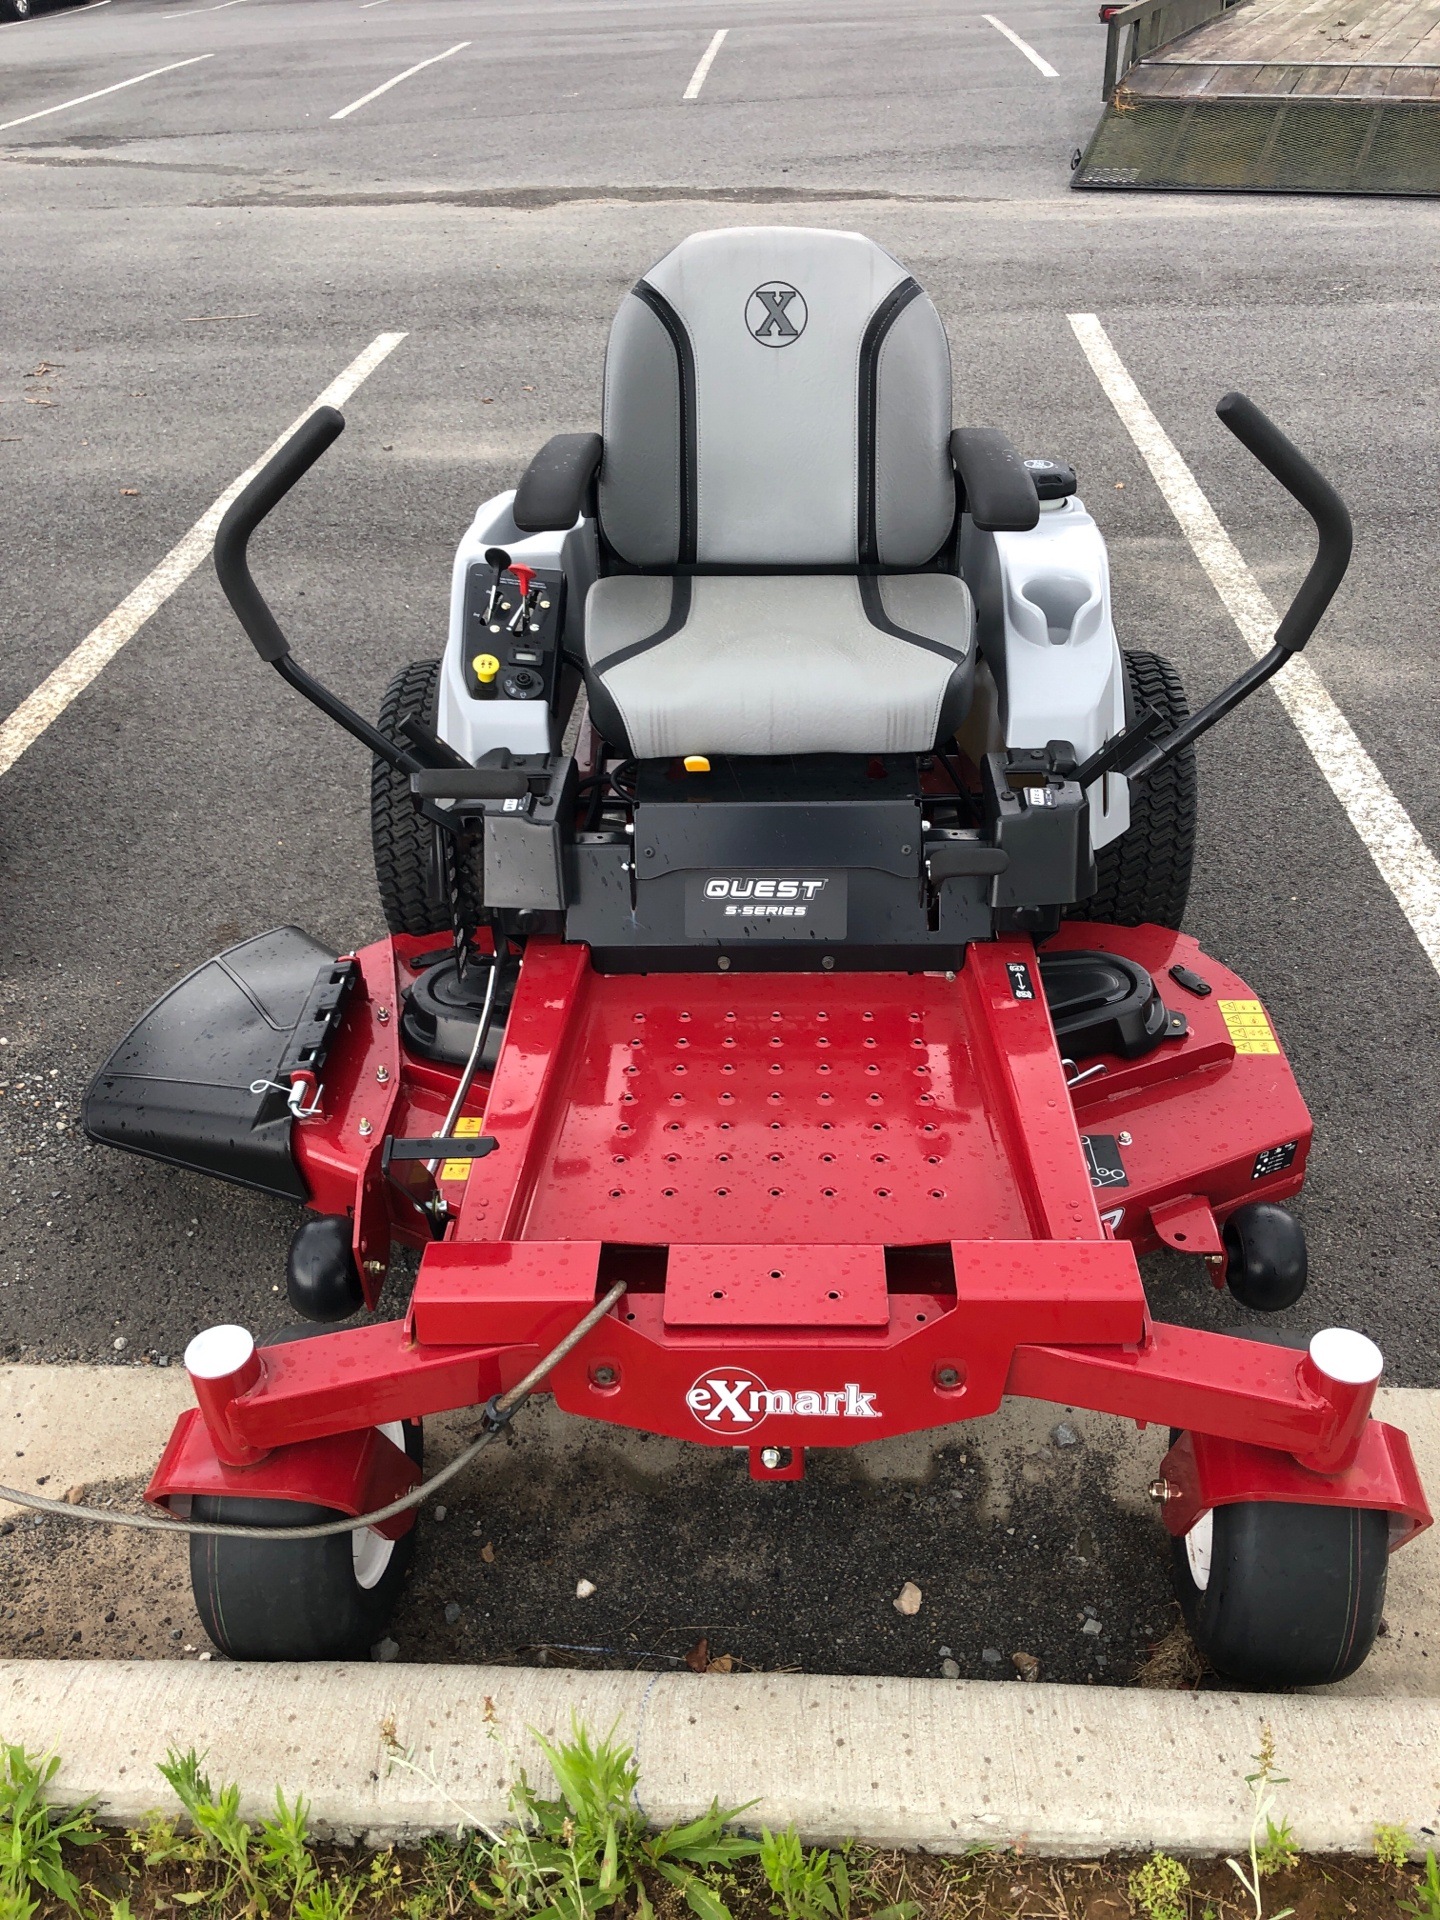 2019 Exmark Quest S-Series 50 in. Exmark 708 cc in Conway, Arkansas - Photo 1